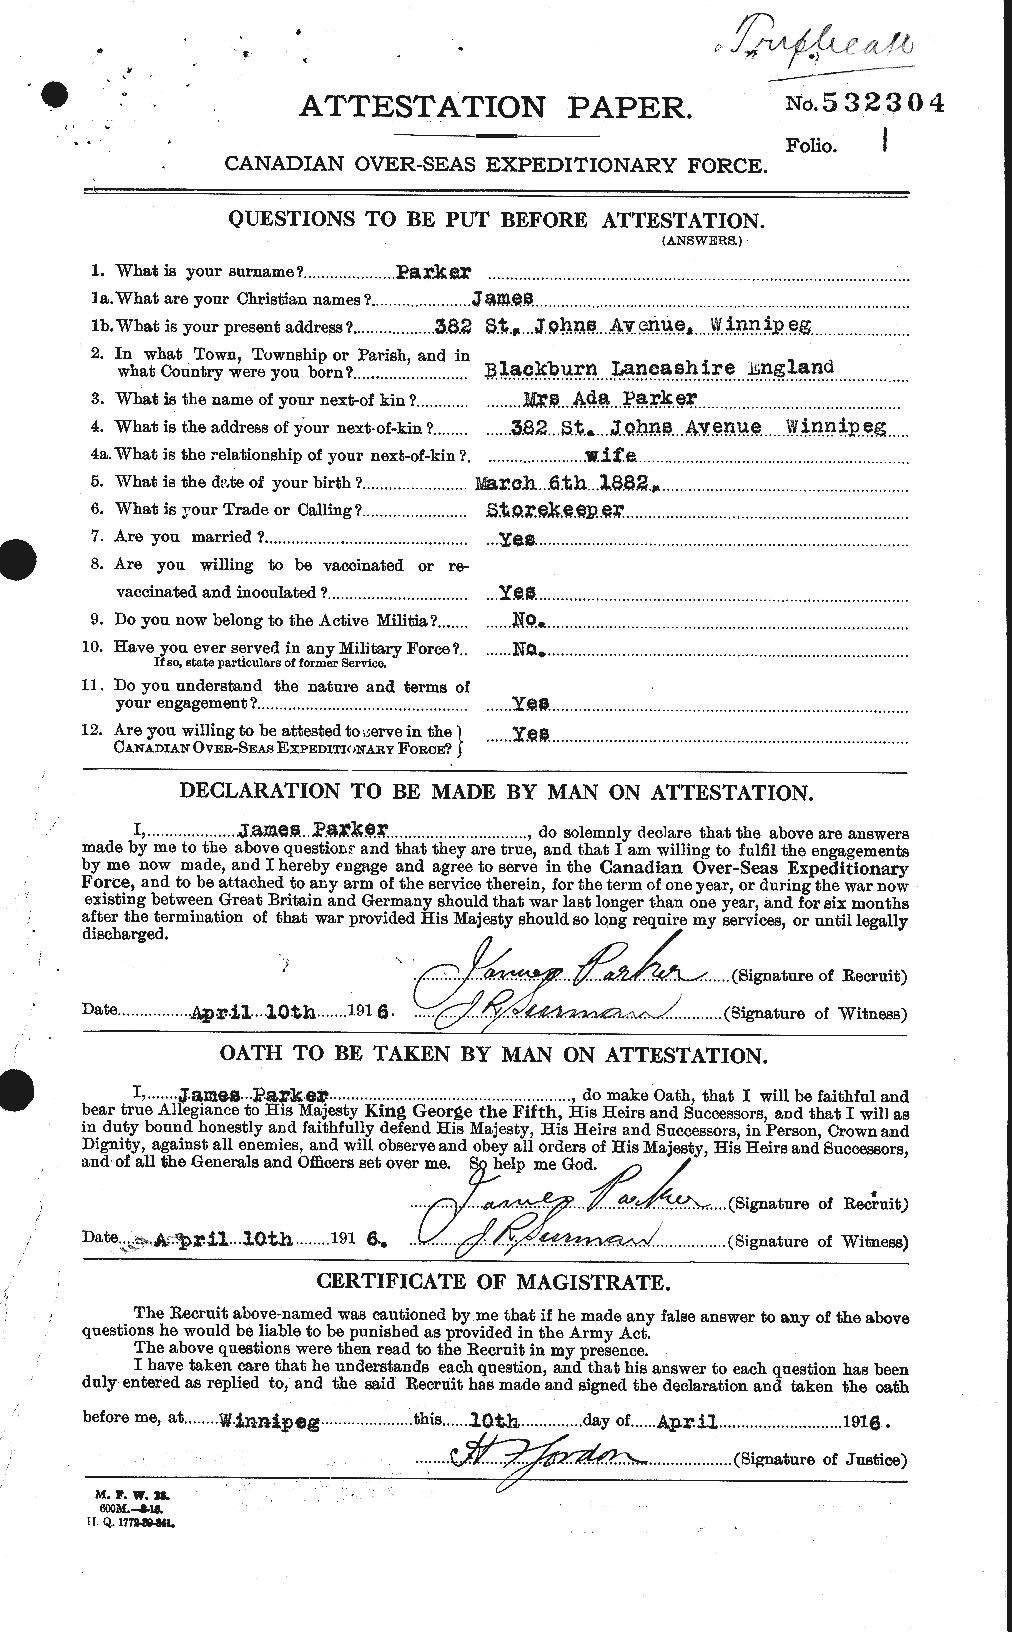 Personnel Records of the First World War - CEF 565414a